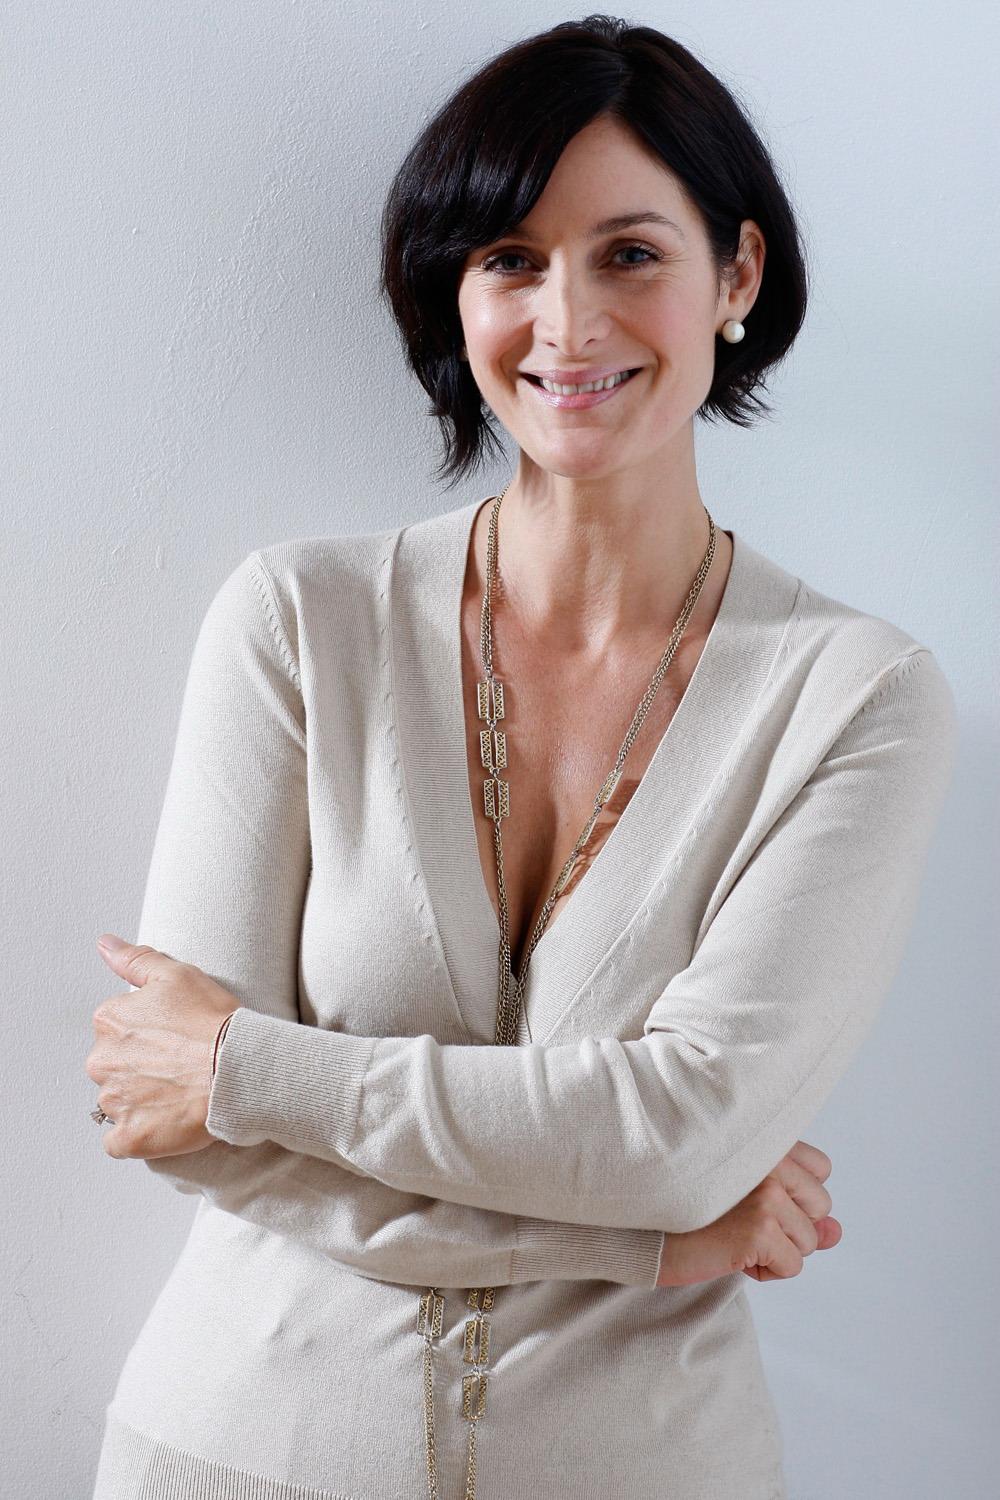 Photo №10094 Carrie-Anne Moss.